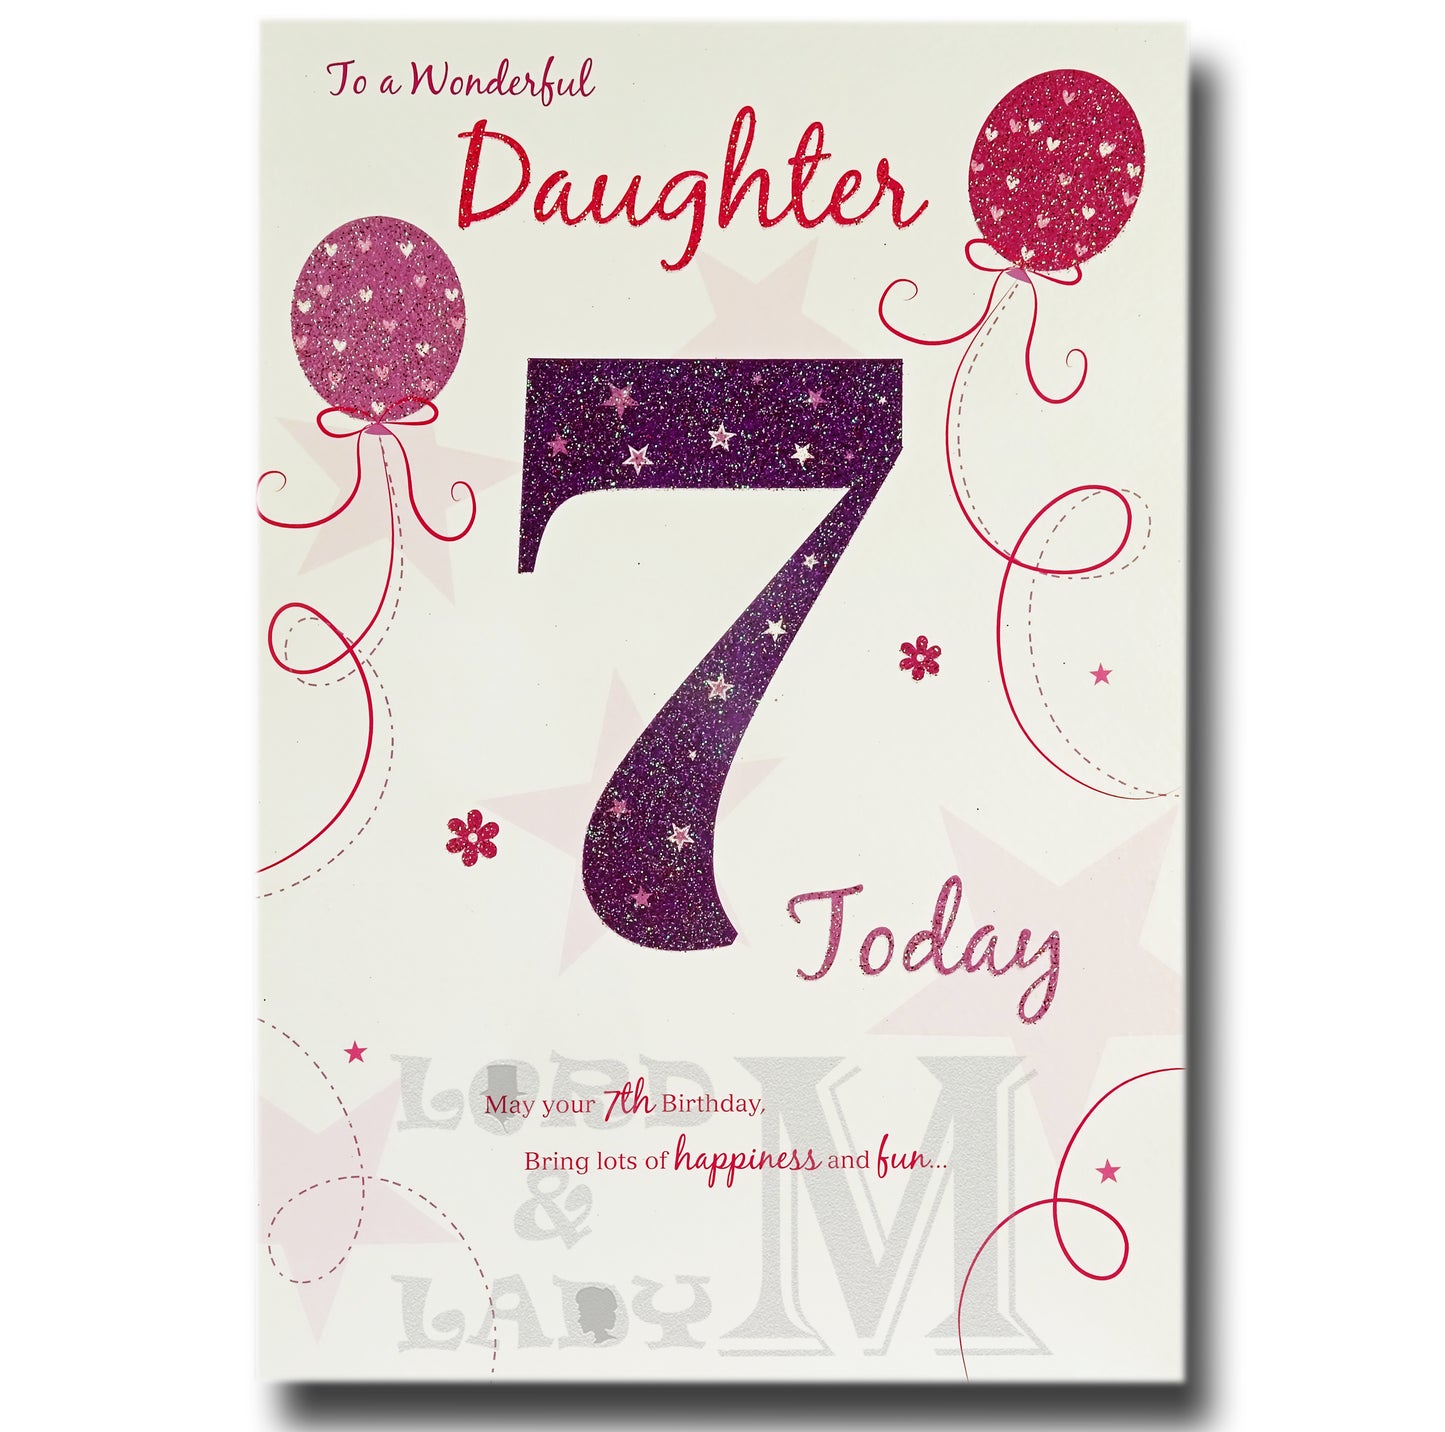 23cm - To A Wonderful Daughter 7 Today - E